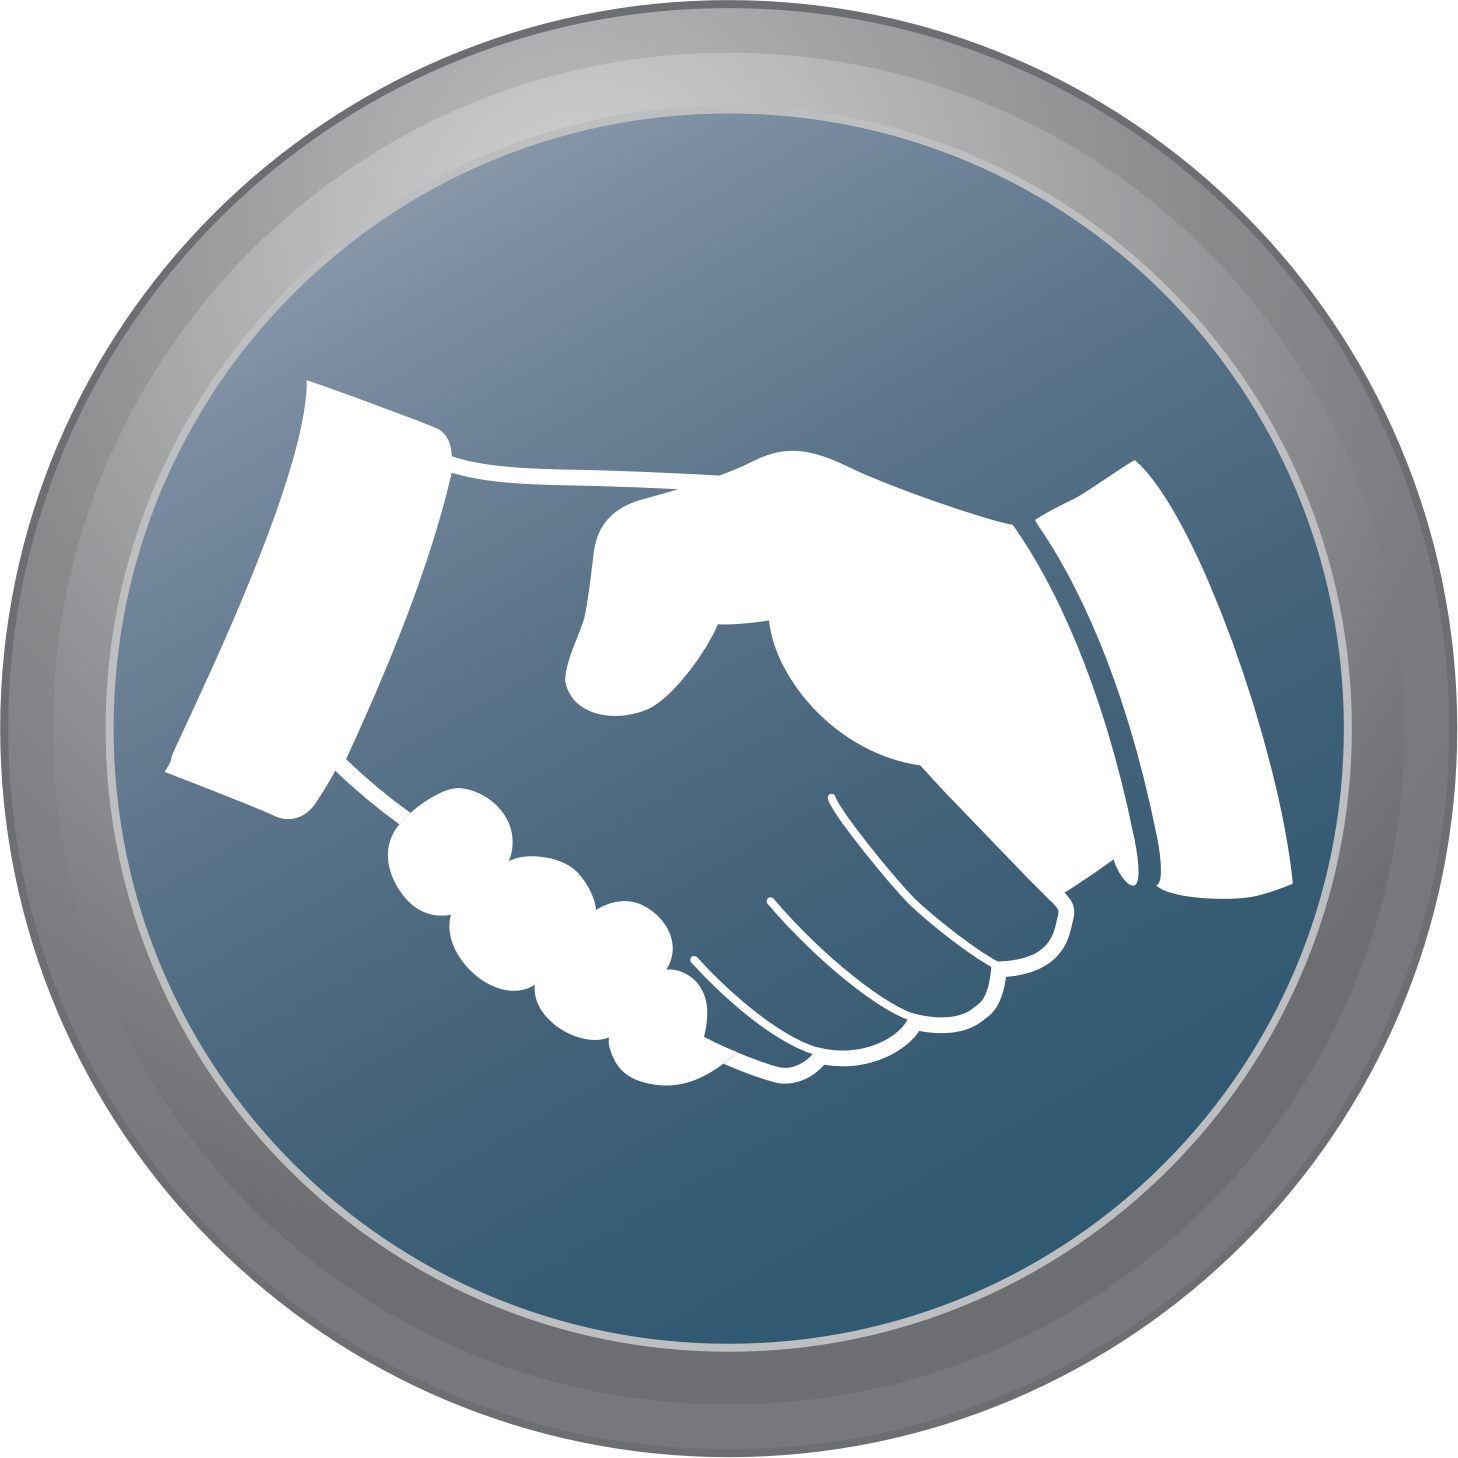 Free Shake Hands Clipart Image - 16922, Shake Hands Clipart ~ Free ...